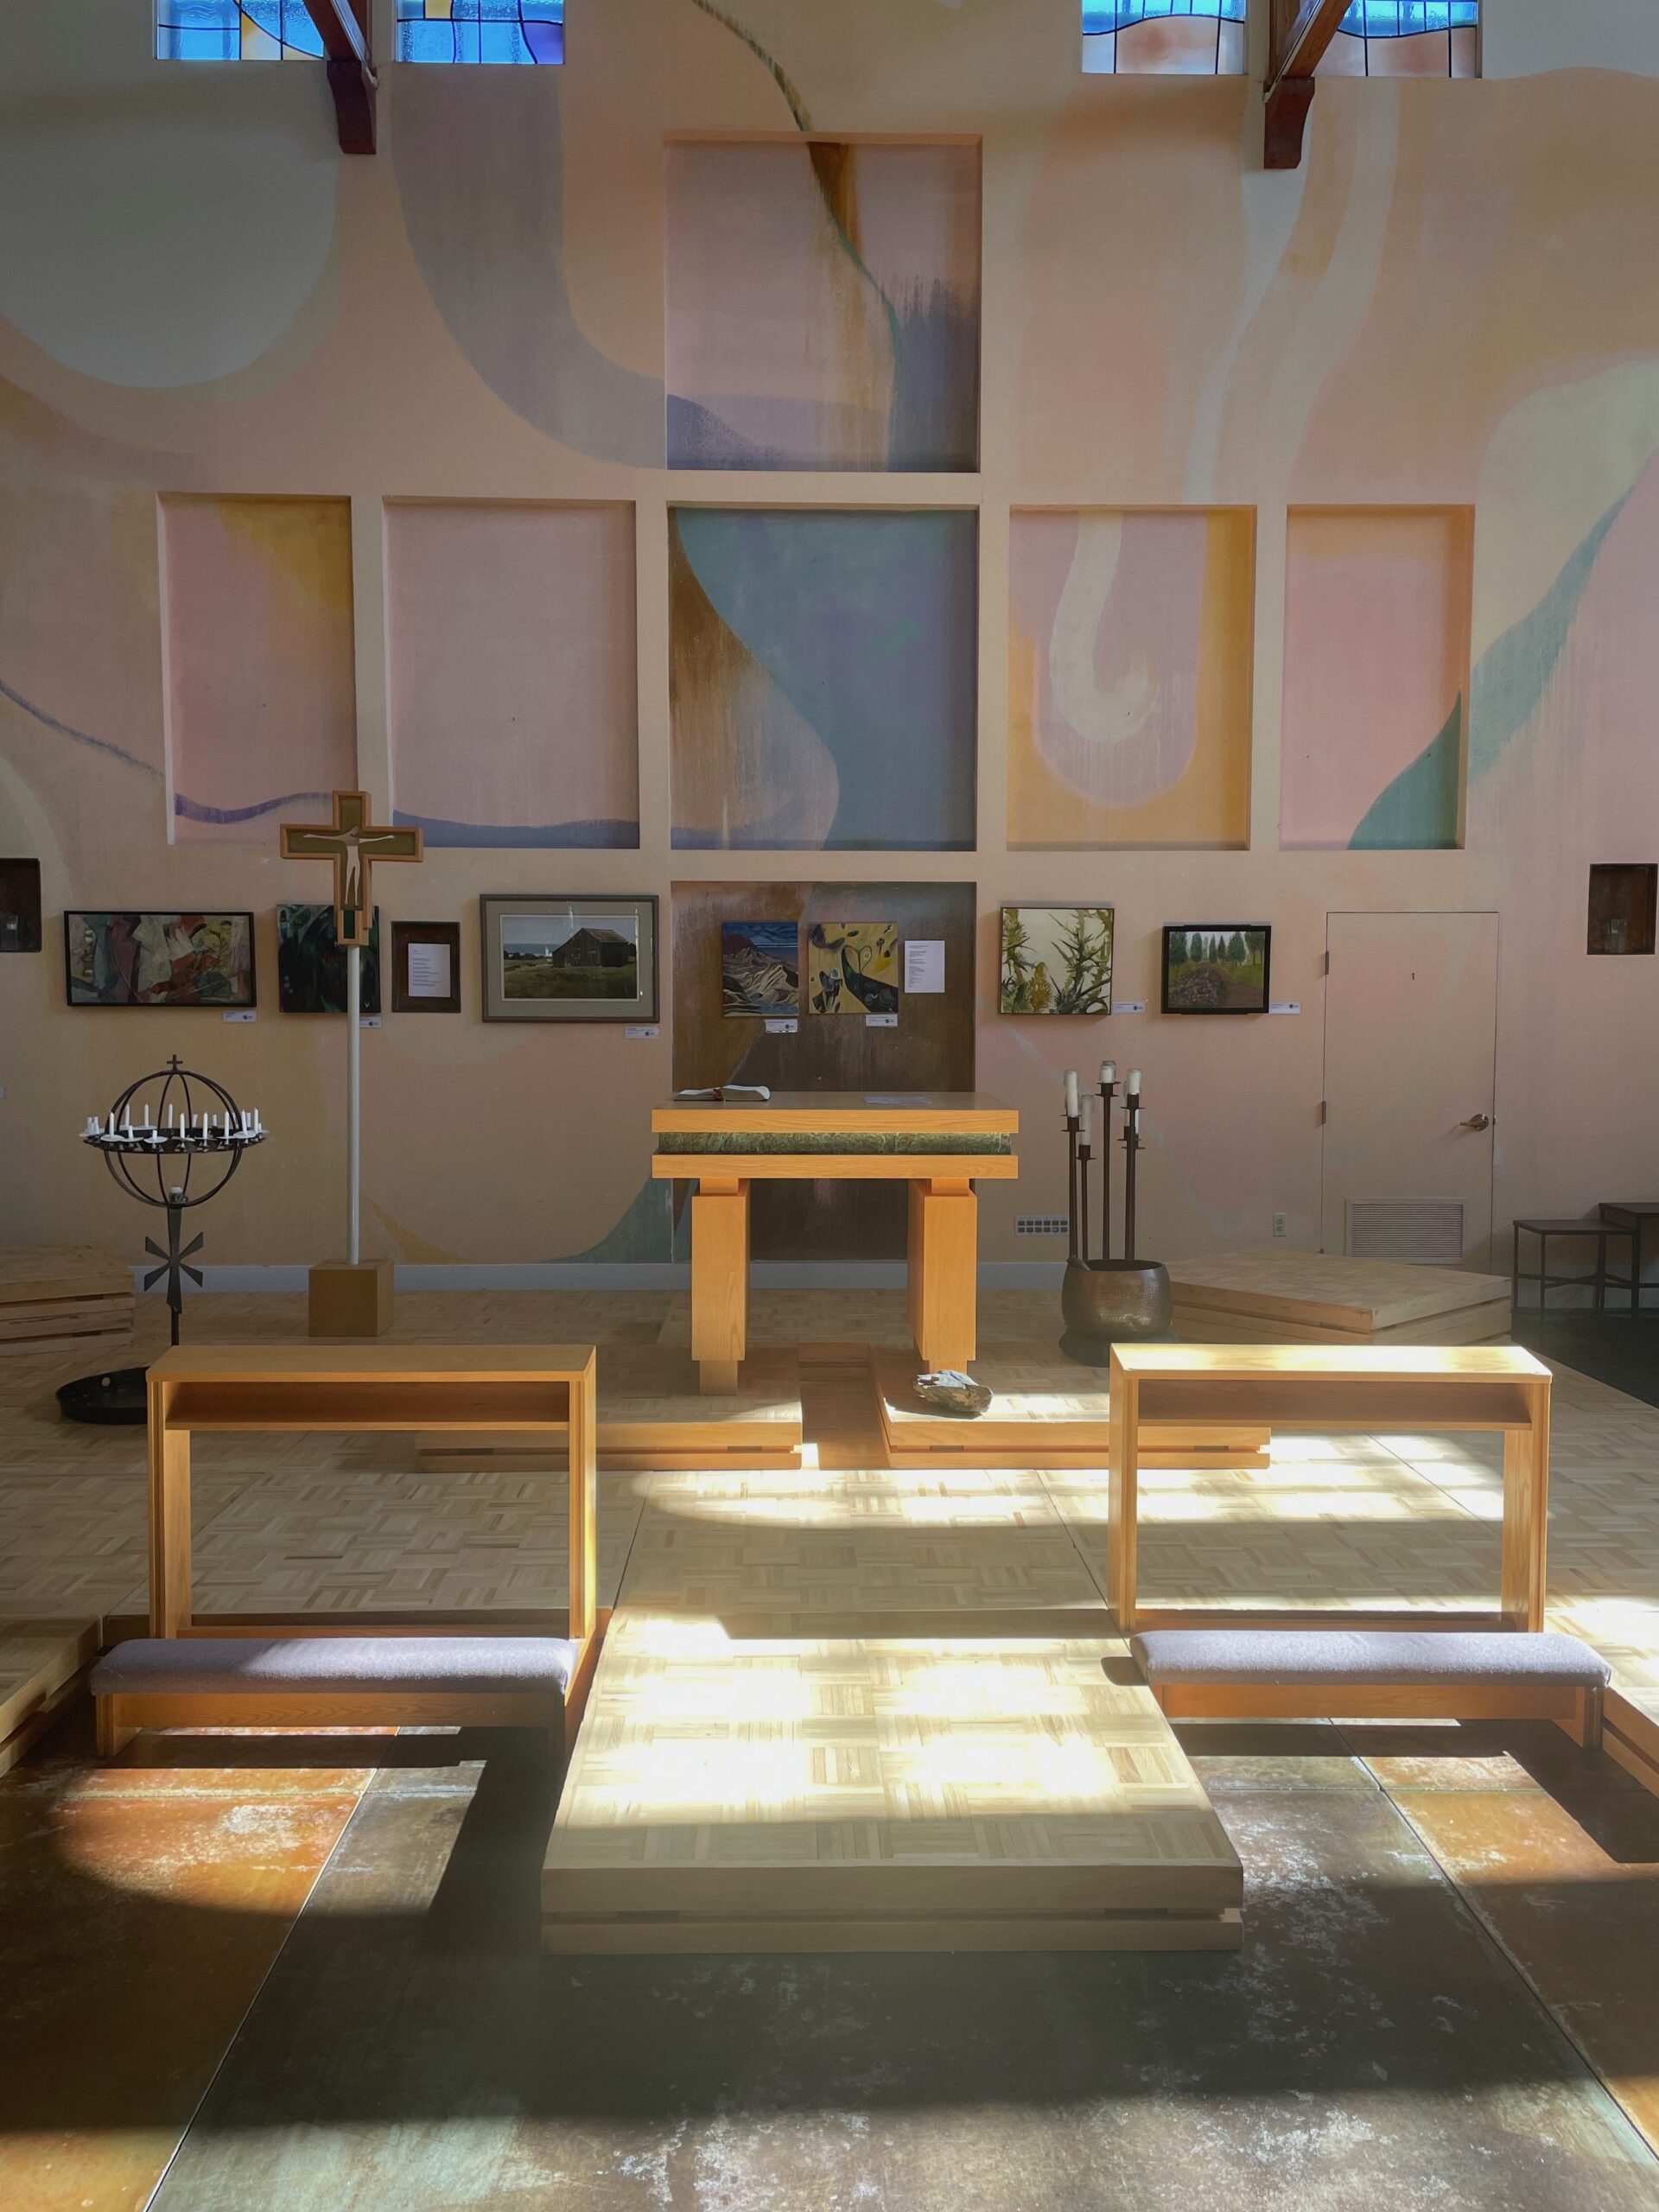 Photo of the Peace Sanctuary prepared for Sunday Worship, with sunlight and shadows playing across the chancel.